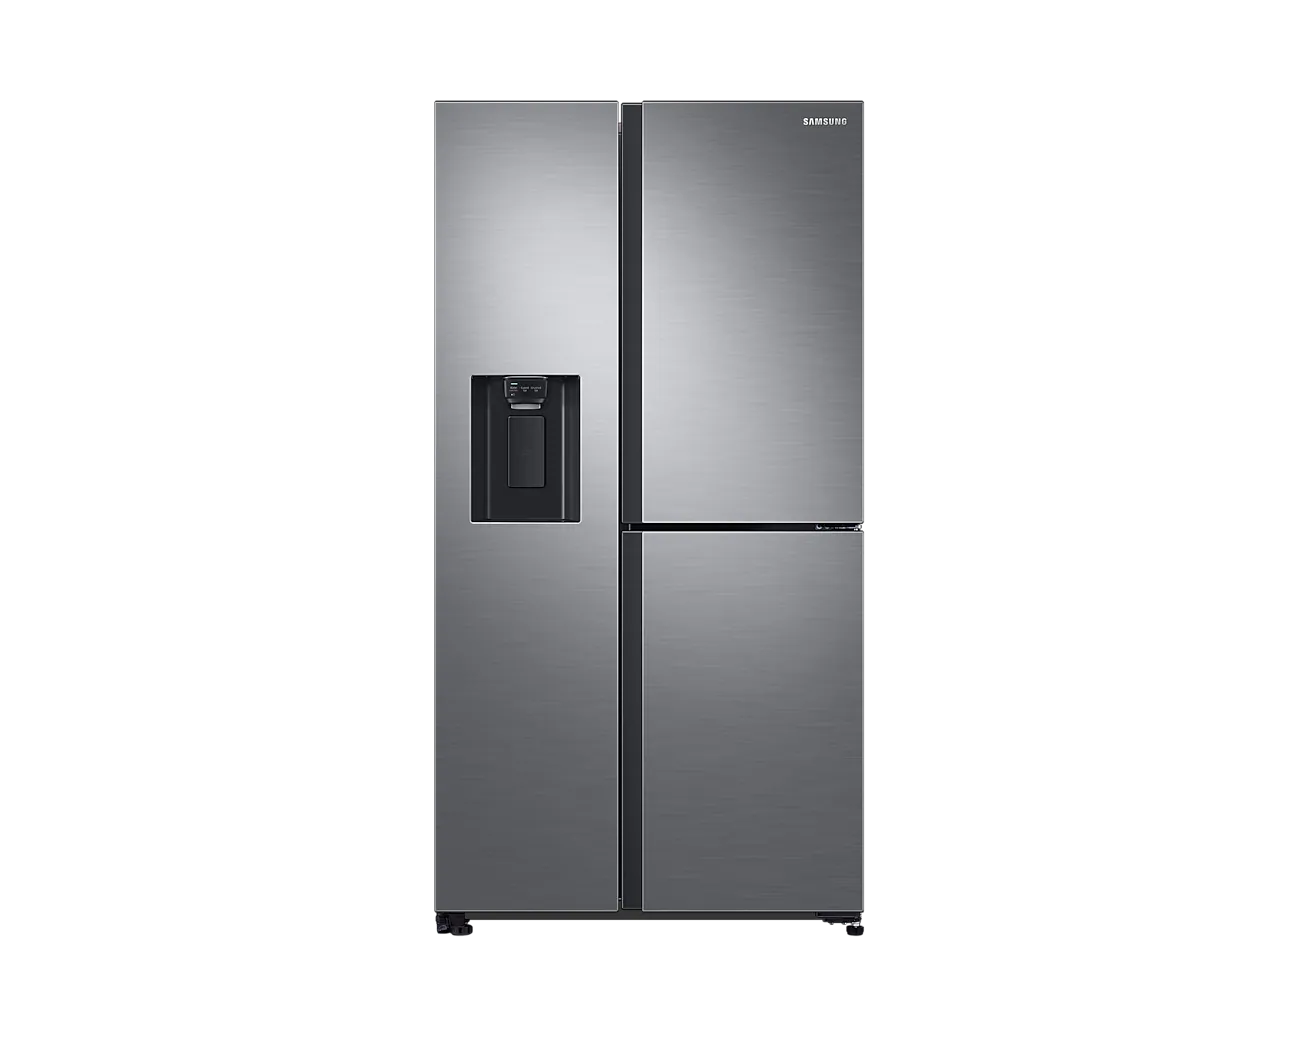 Samsung RS65R5691M9 Multi-door refrigerator with water and ice dispenser, 602L